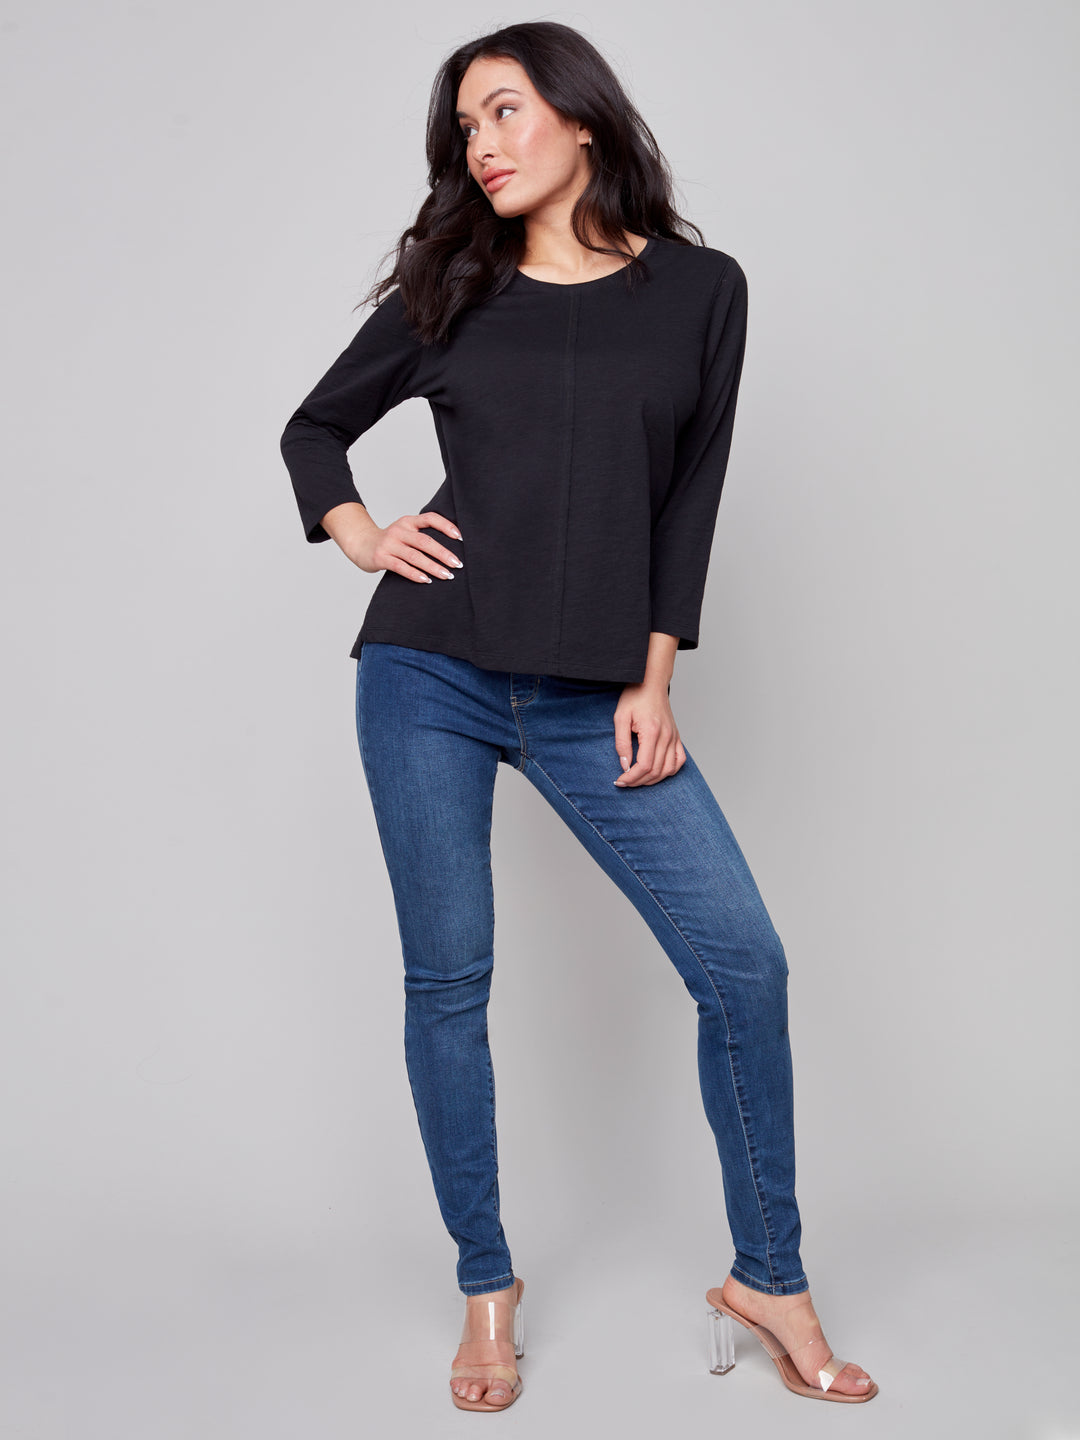 Long Sleeve Crew Neck With Contrast Trim